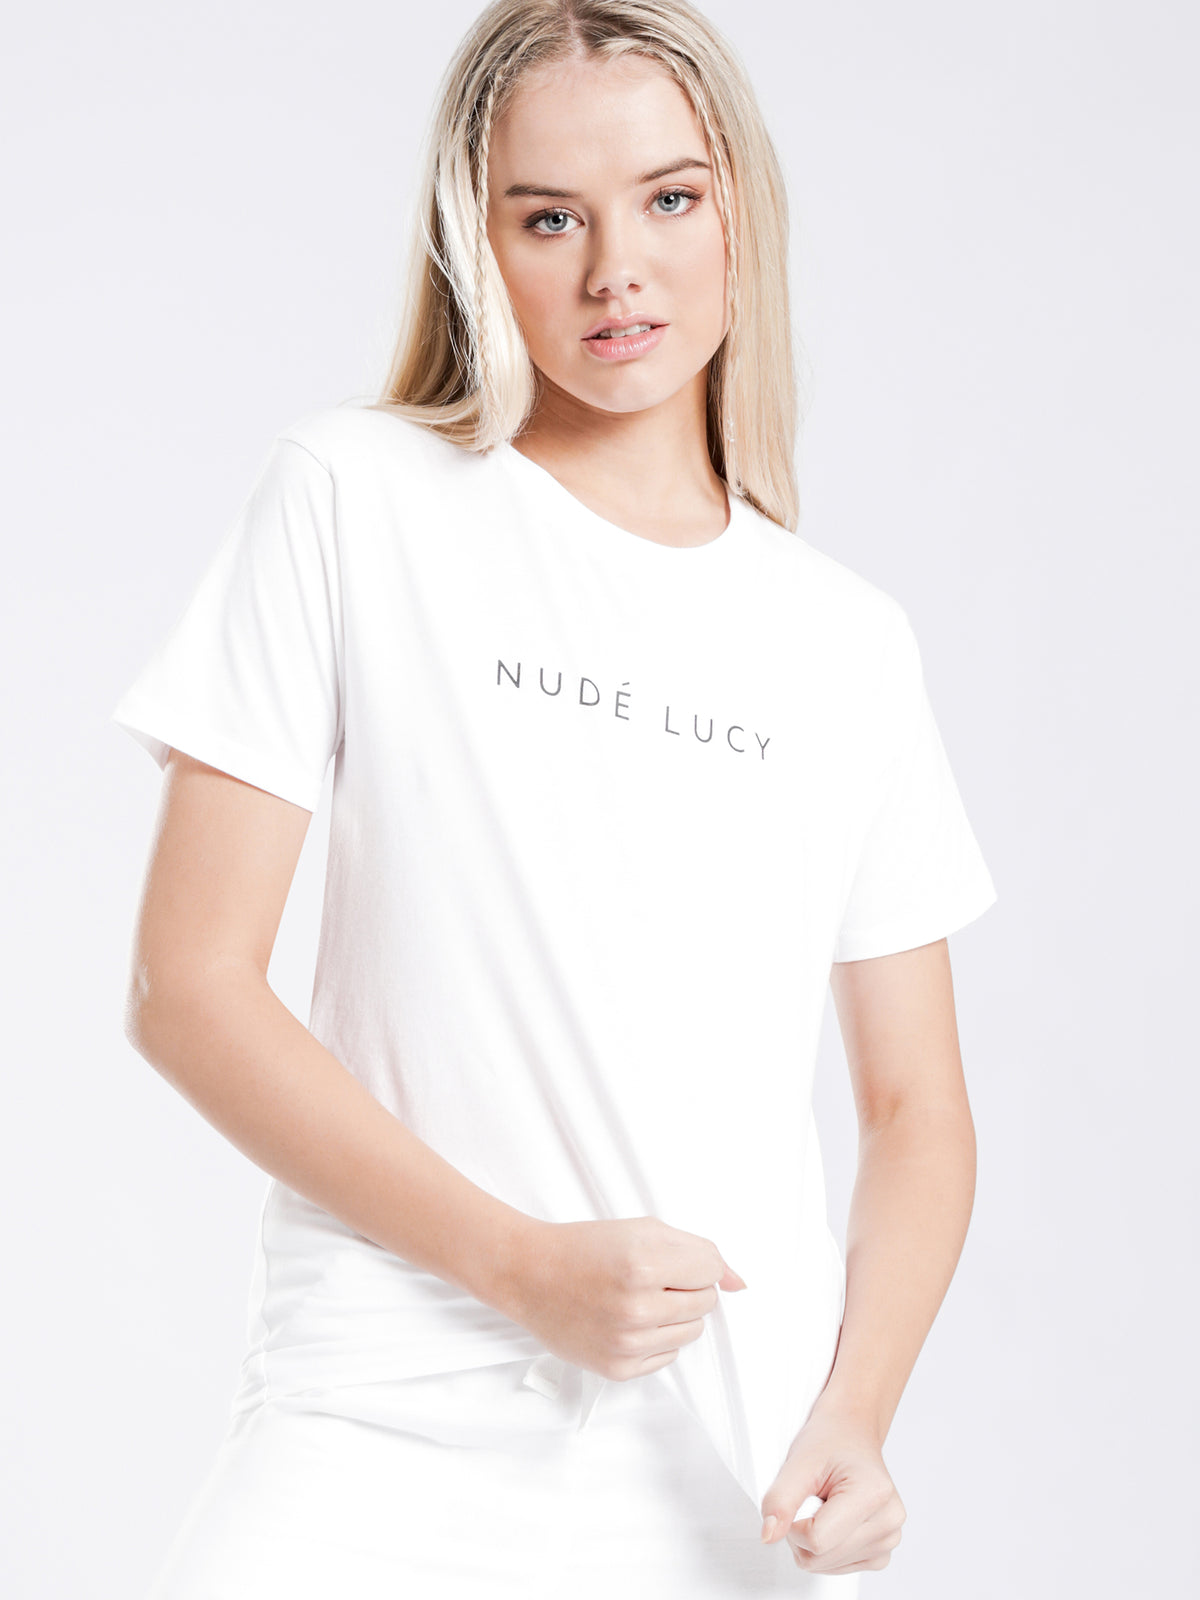 Nude Lucy Slogan T-Shirt in White